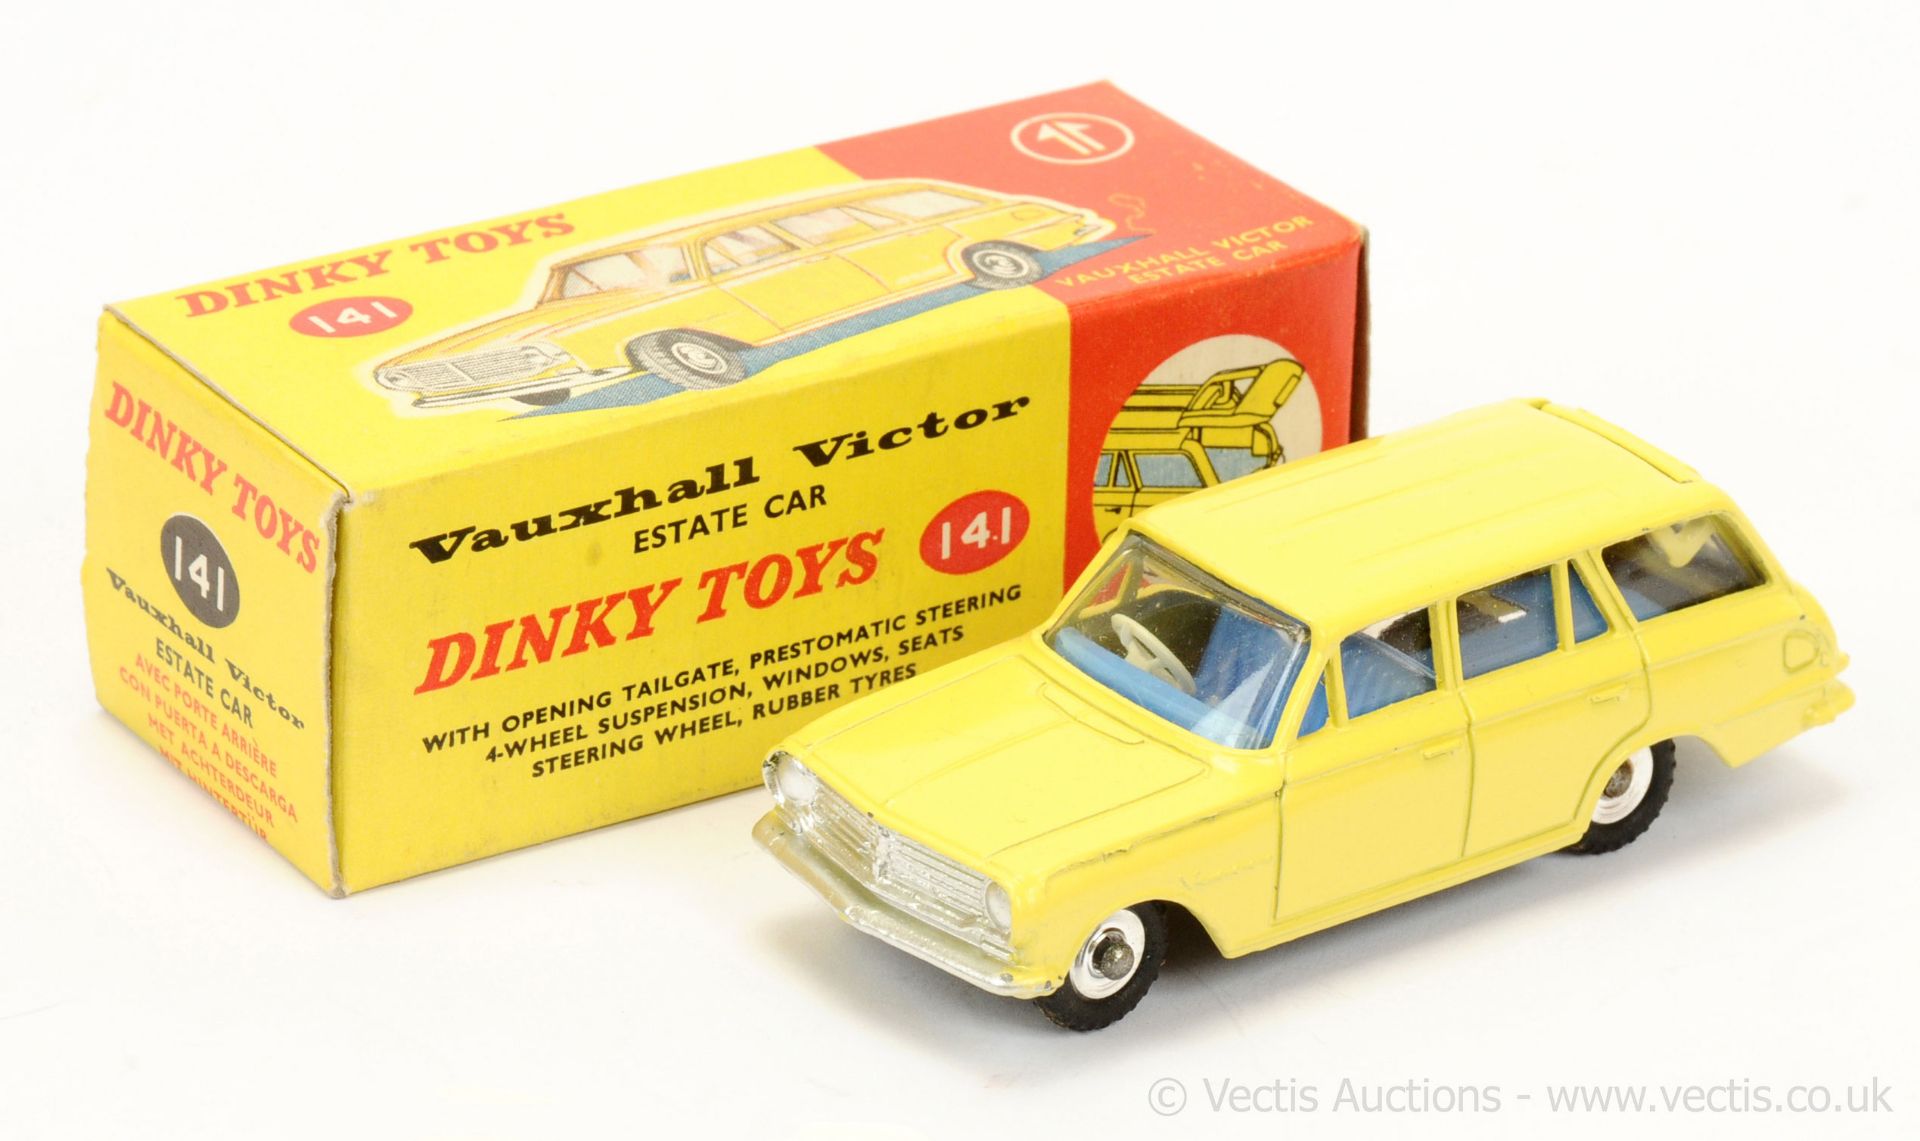 Dinky 141 Vauxhall Victor Estate Car - pale